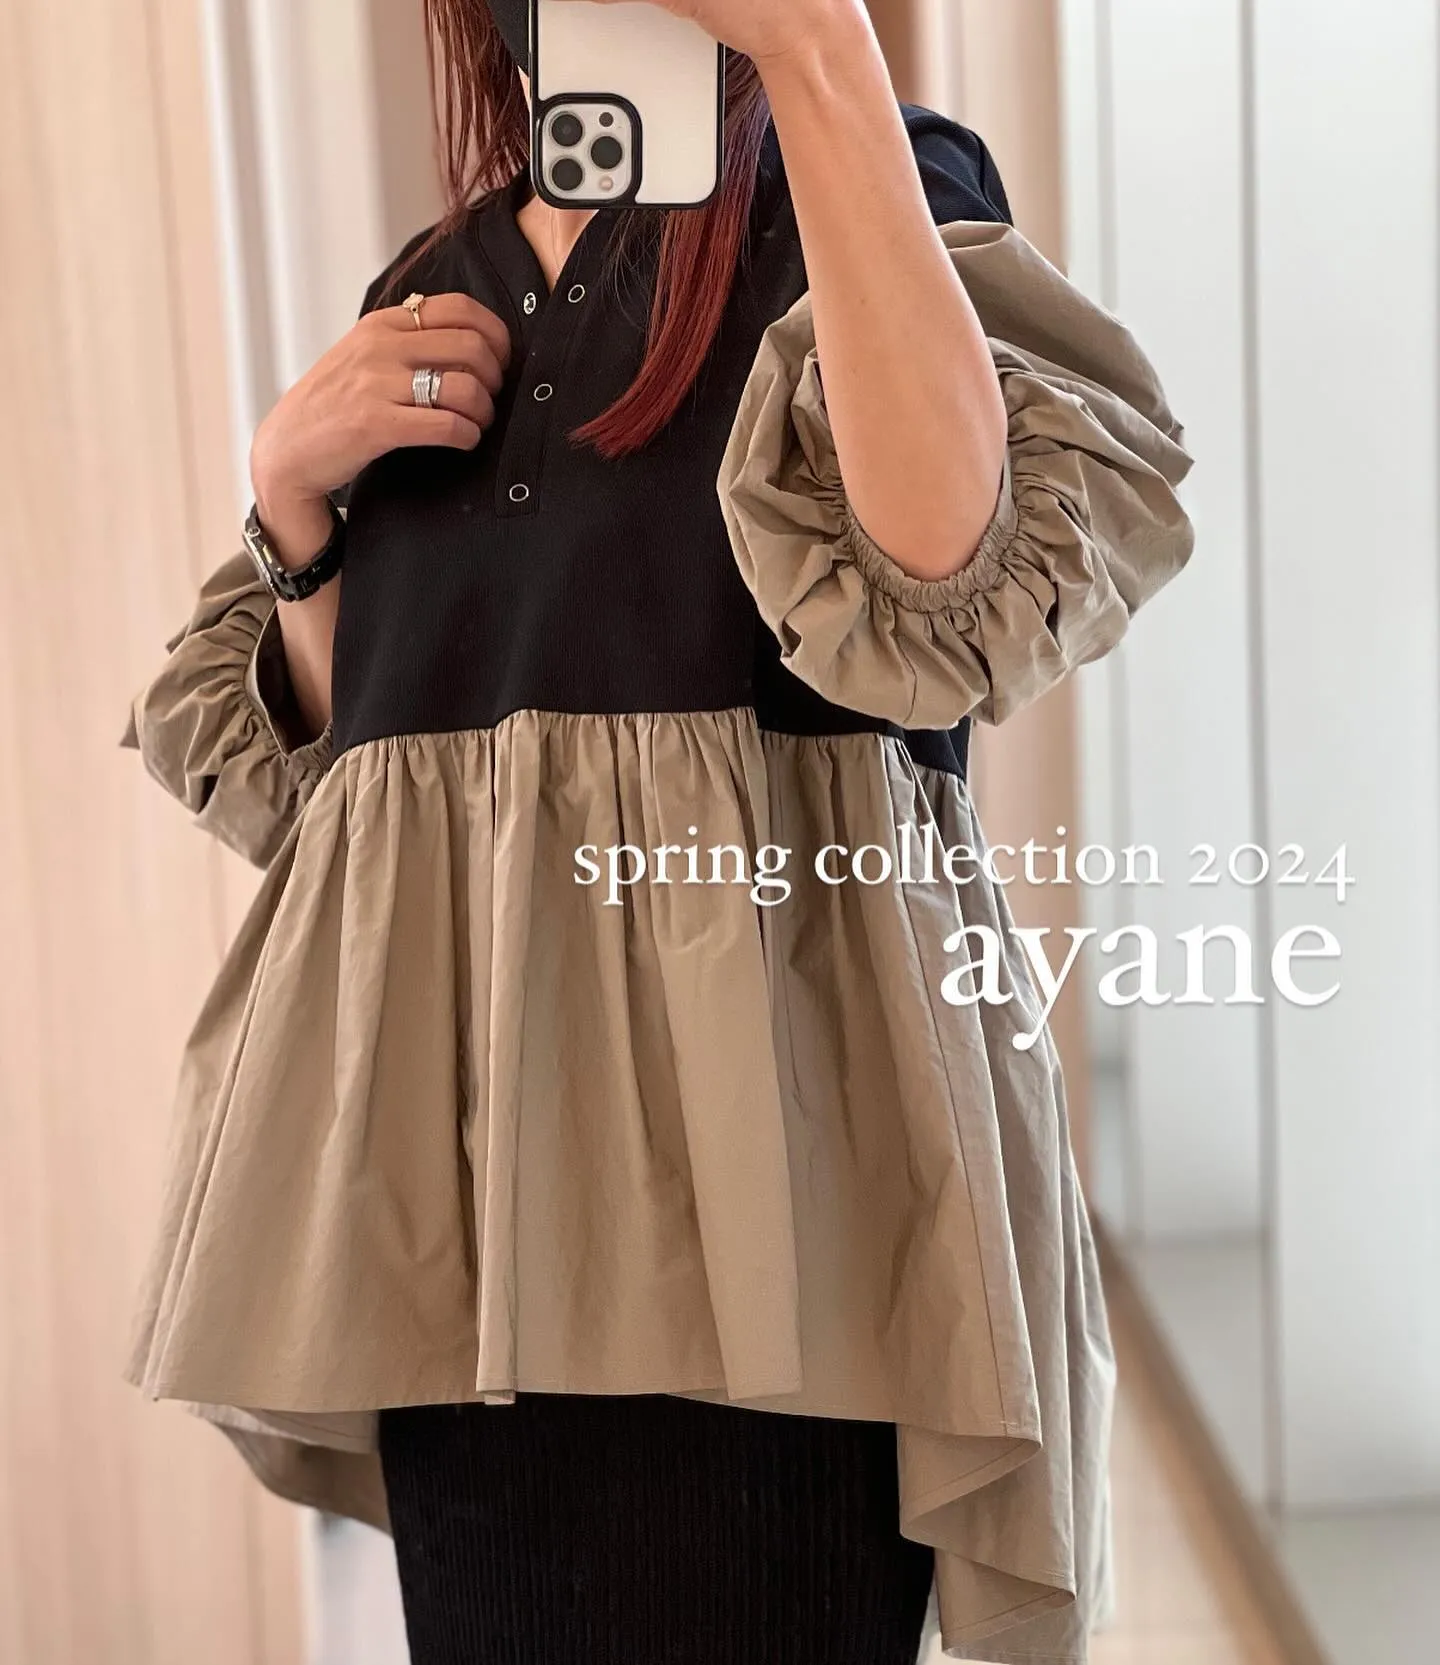 ayane  spring collection 2024